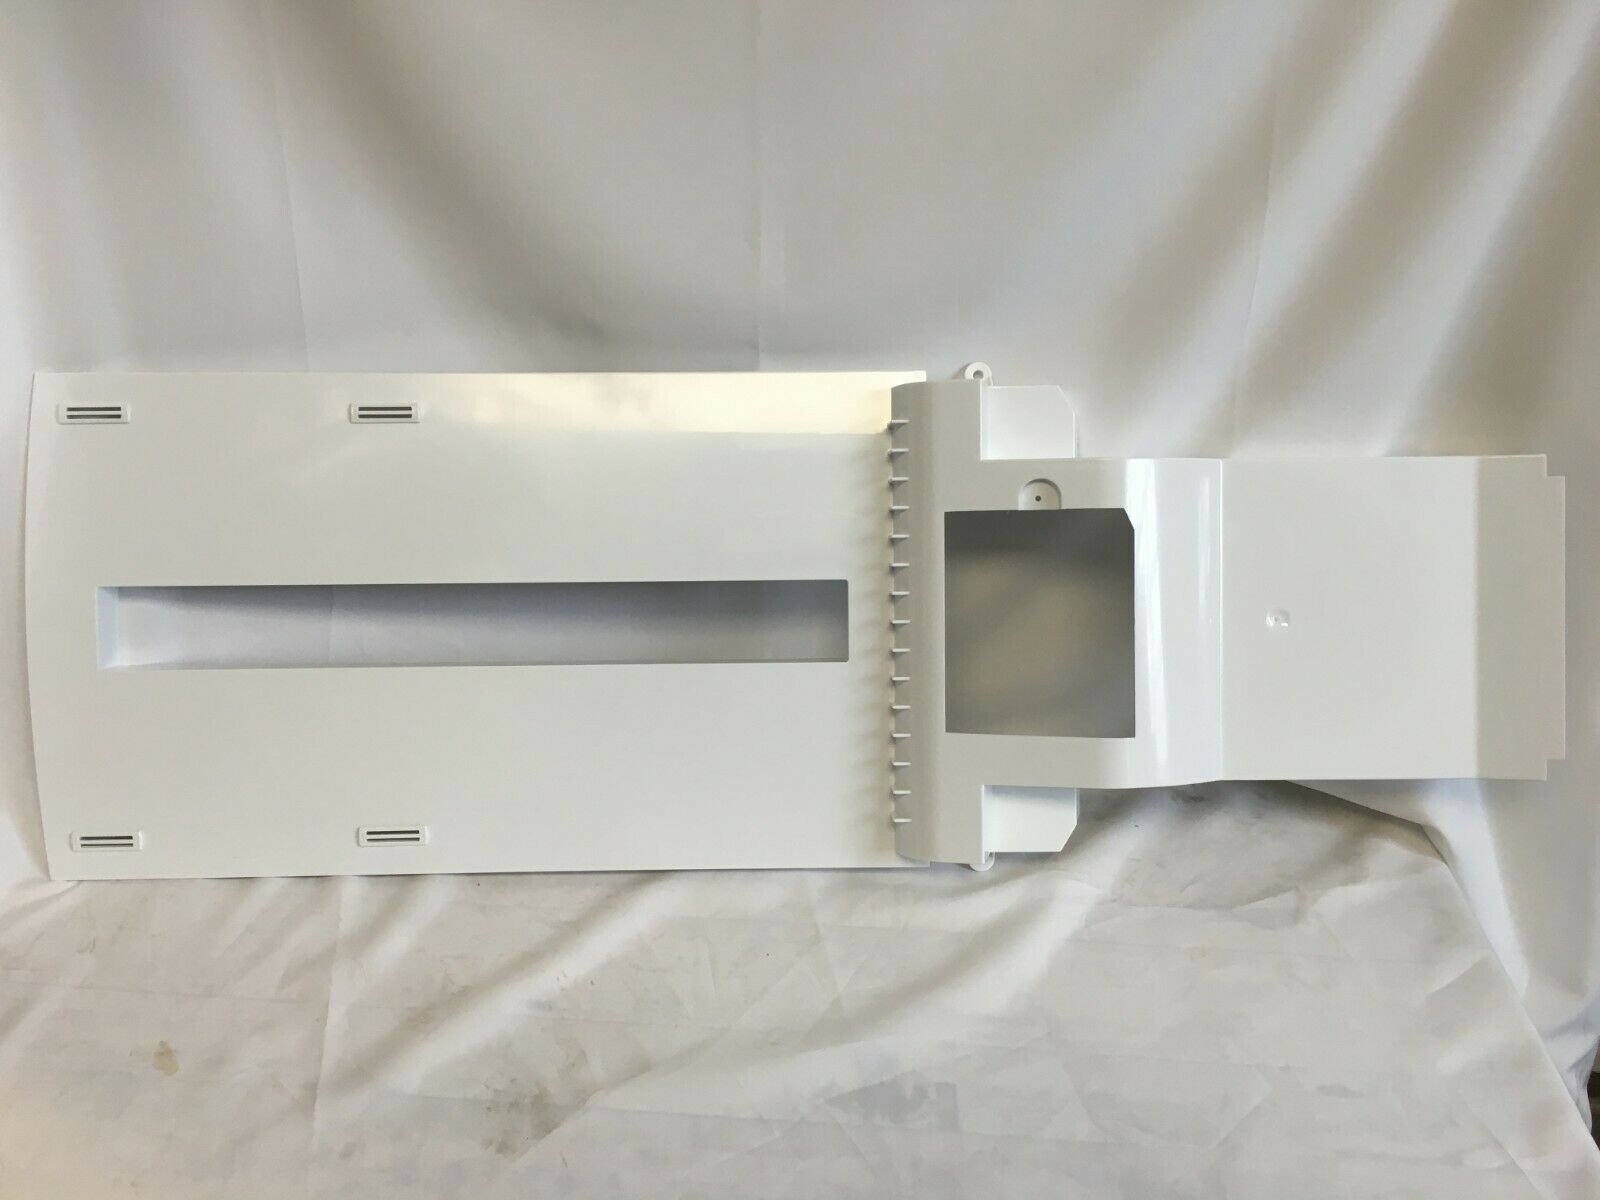 Primary image for ELECTROLUX AIR DUCT COVER 242058504 BRAND NEW